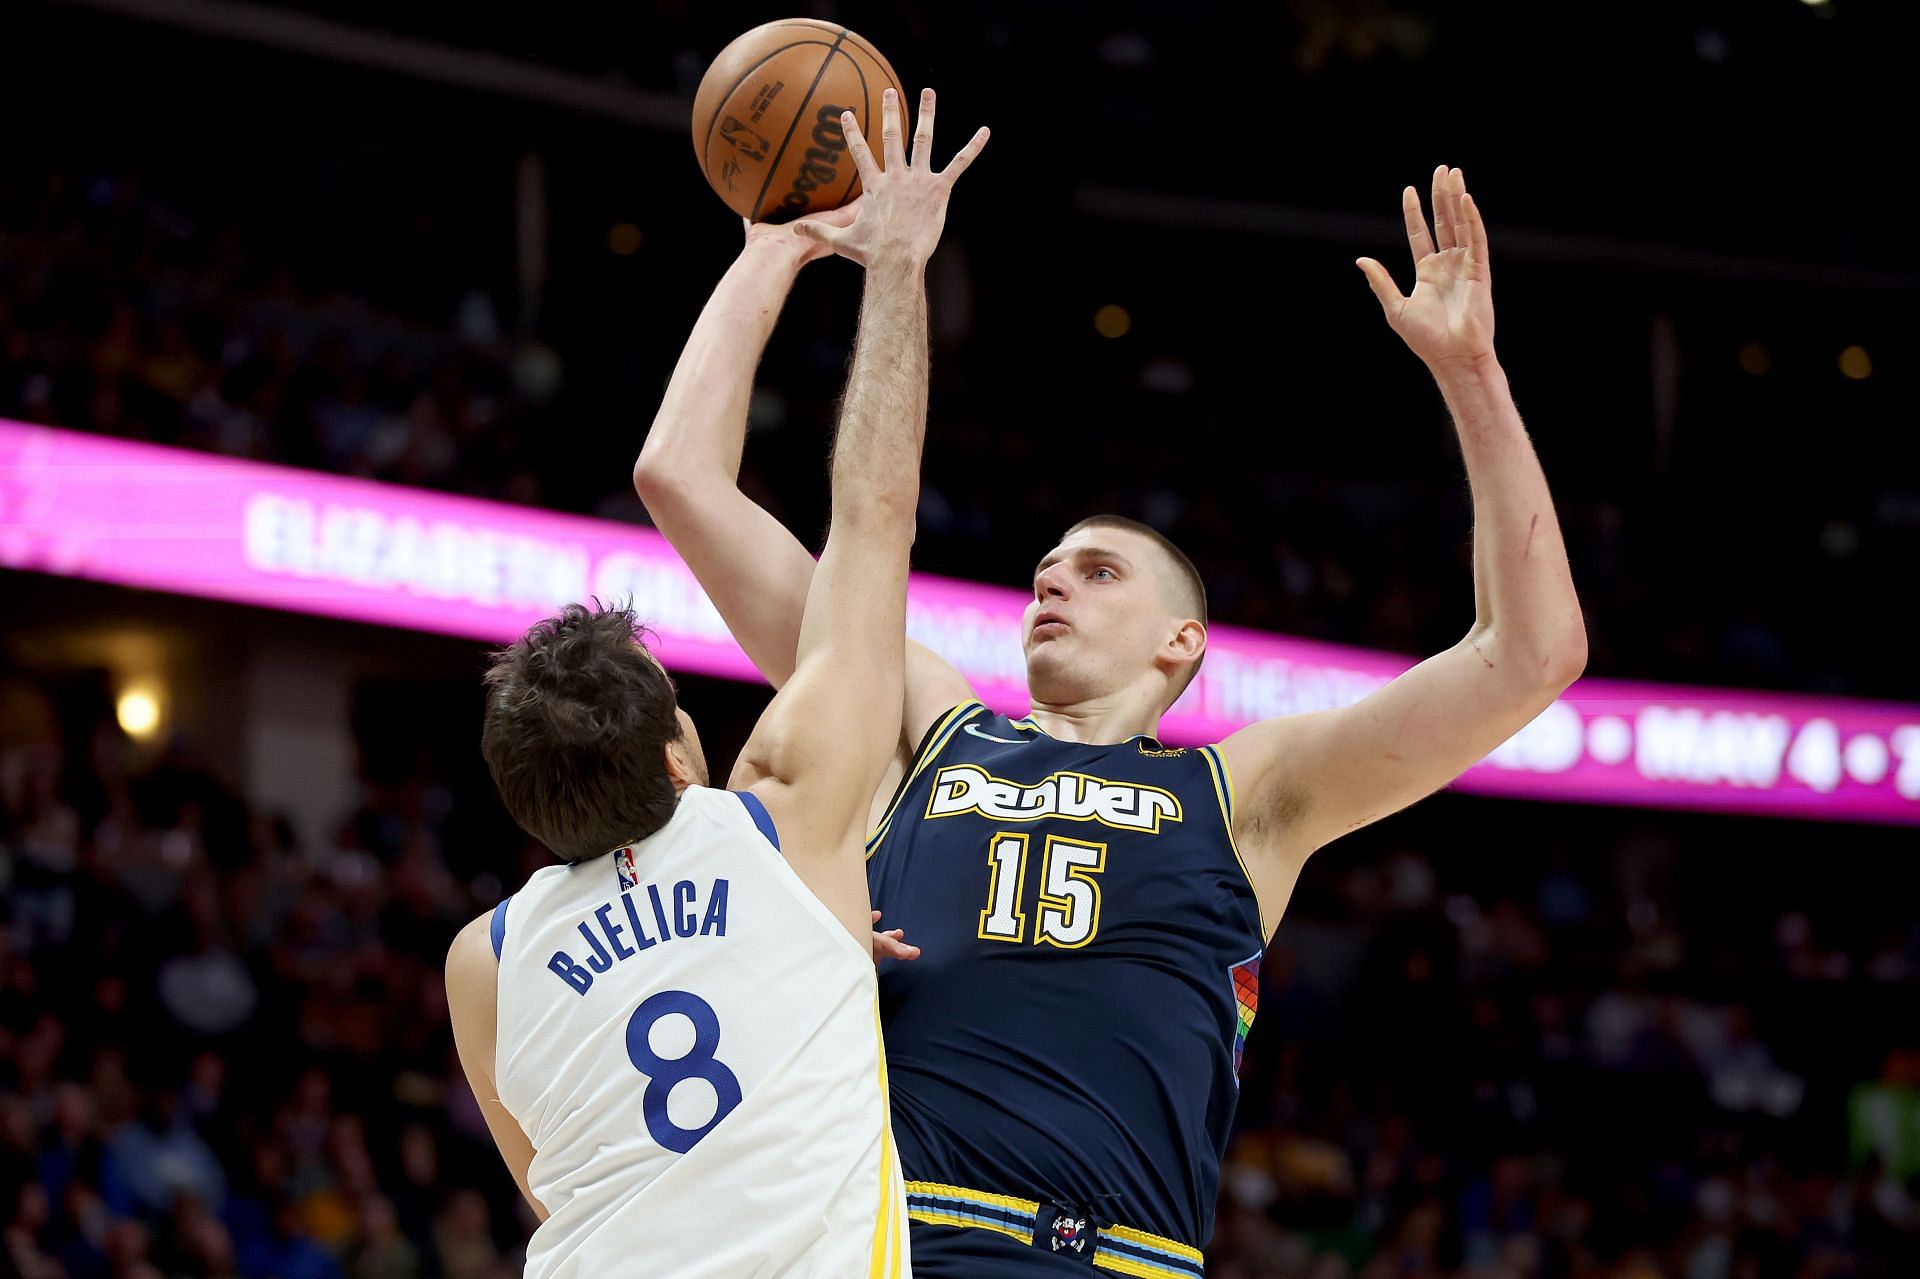 Nikola Jokic put up one of the greatest seasons from a statistics standpoint.